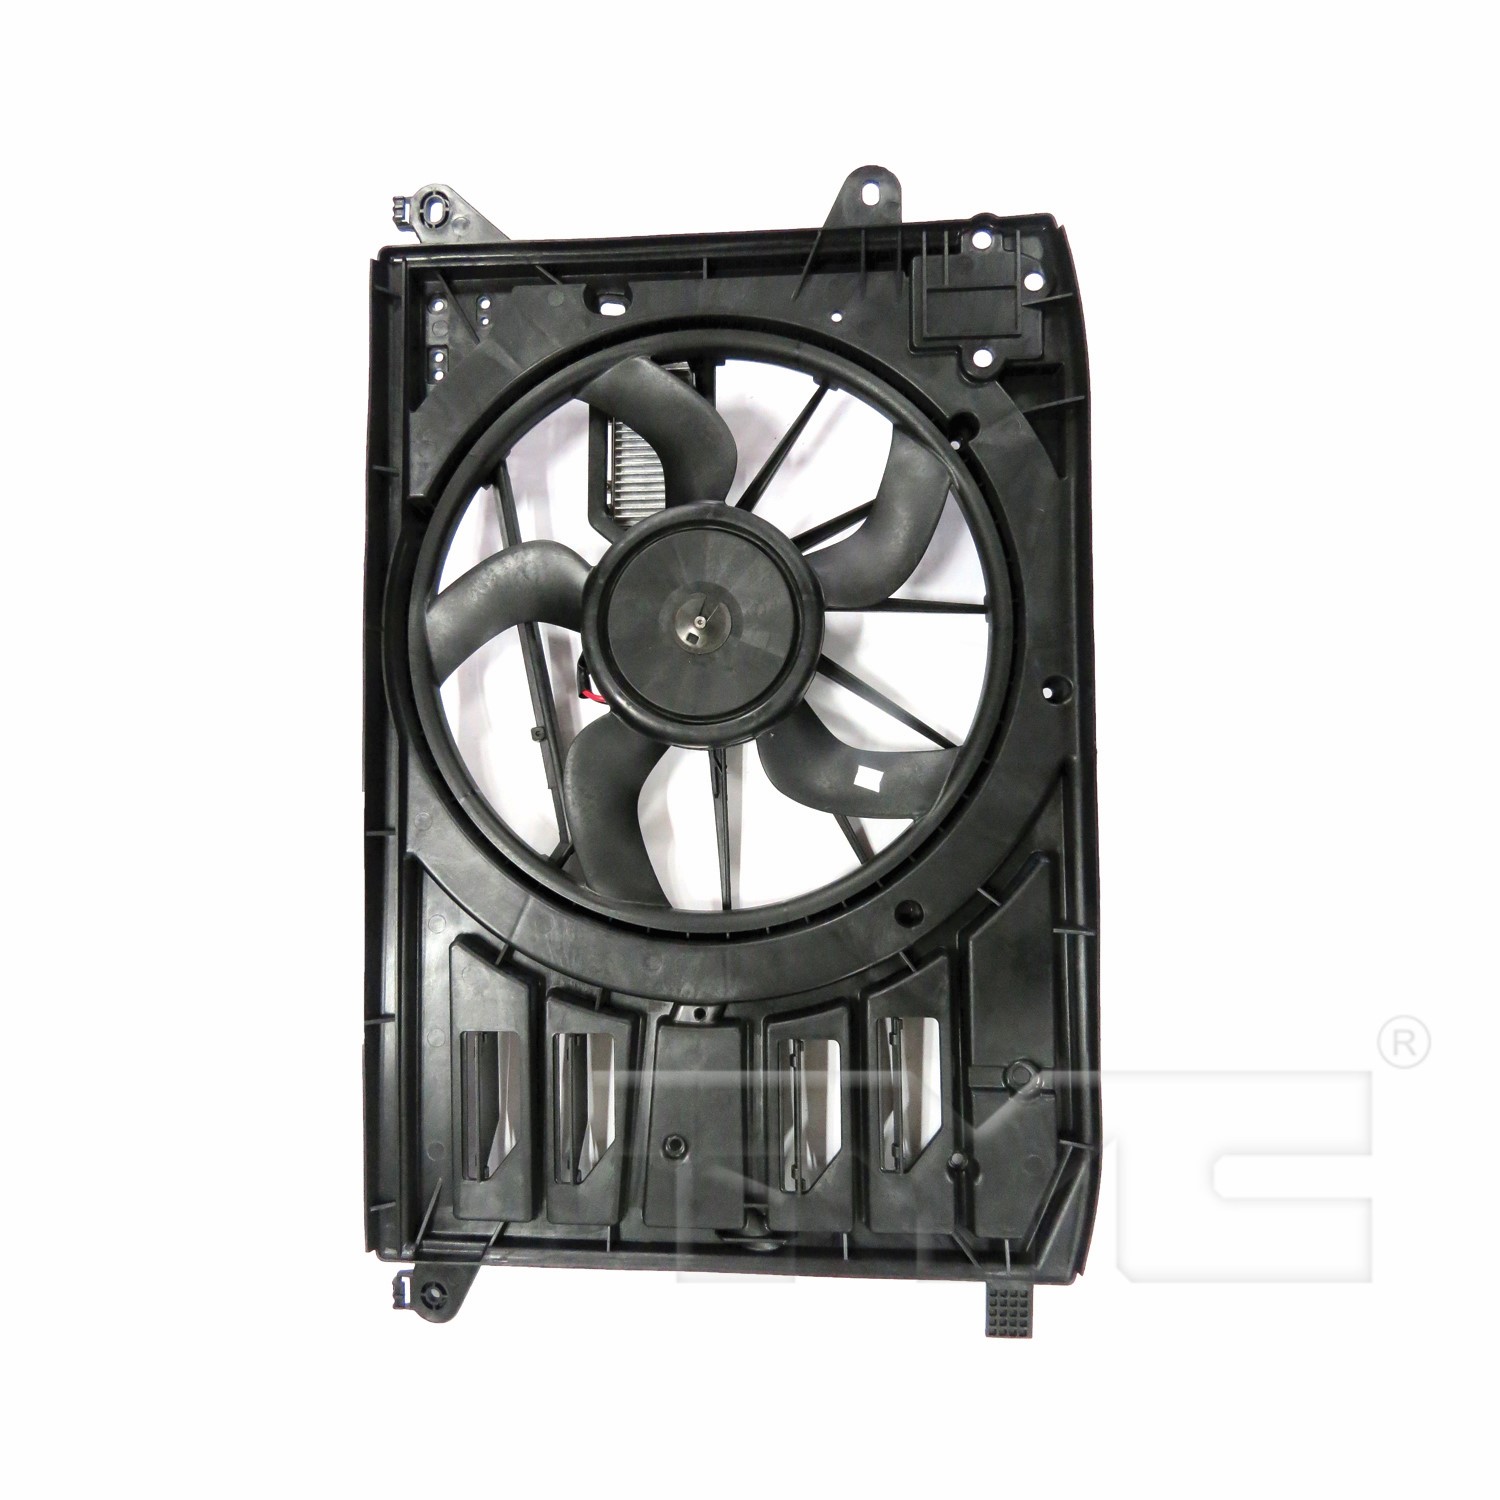 Aftermarket FAN ASSEMBLY/FAN SHROUDS for FORD - C-MAX, C-MAX,13-18,Radiator cooling fan assy